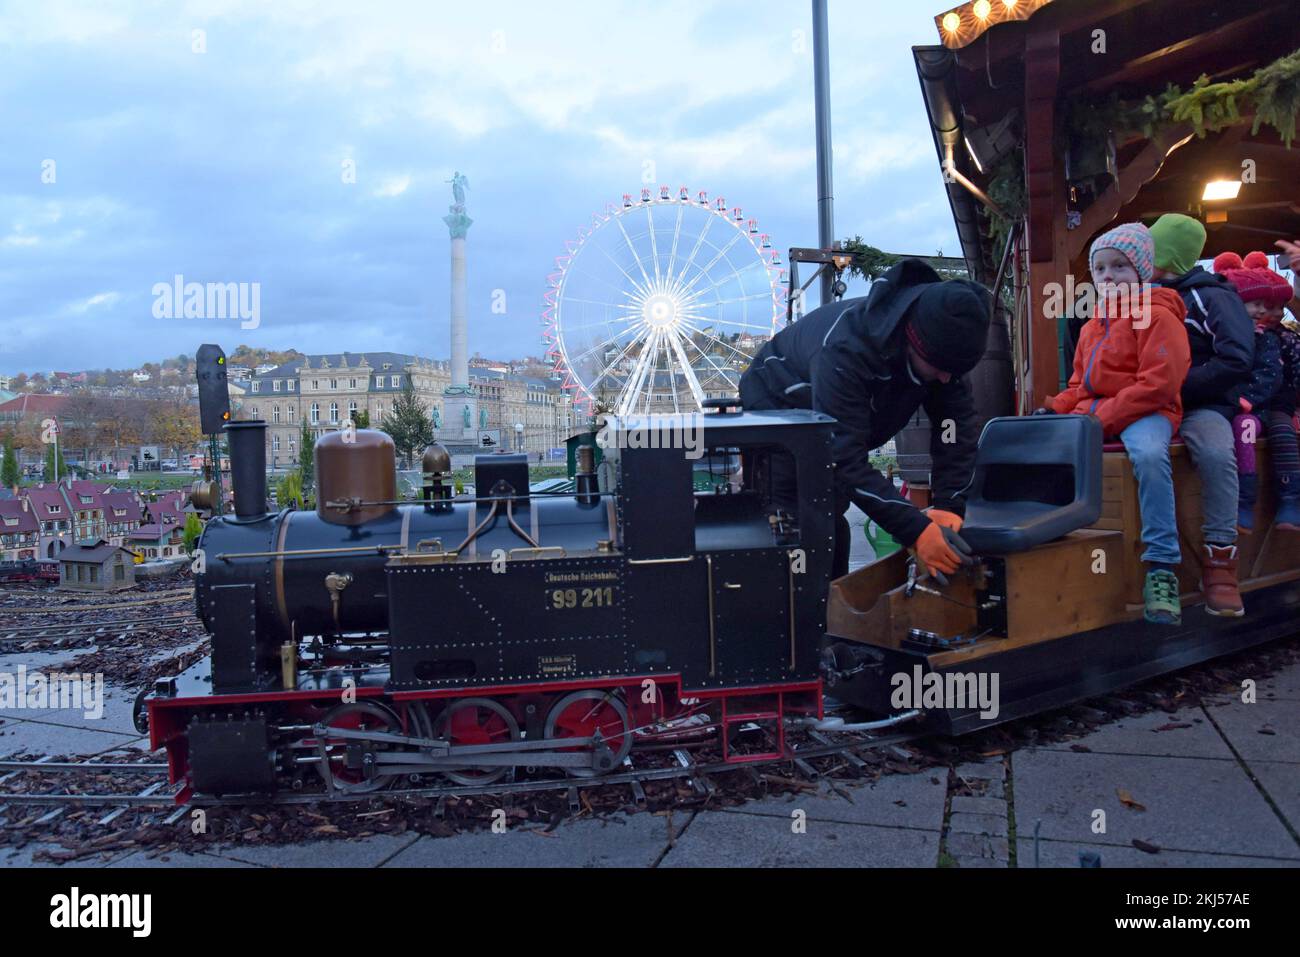 Stuttgart, Germany, 24th November 2022. An engineer fills the miniature steam locomotive with water at Stuttgart Christmas Market. The market, with 200 illuminated and decorated stalls, a fairground and miniature railway display is open every day until 23rd December. G.P.Essex/Alamy Live News Stock Photo